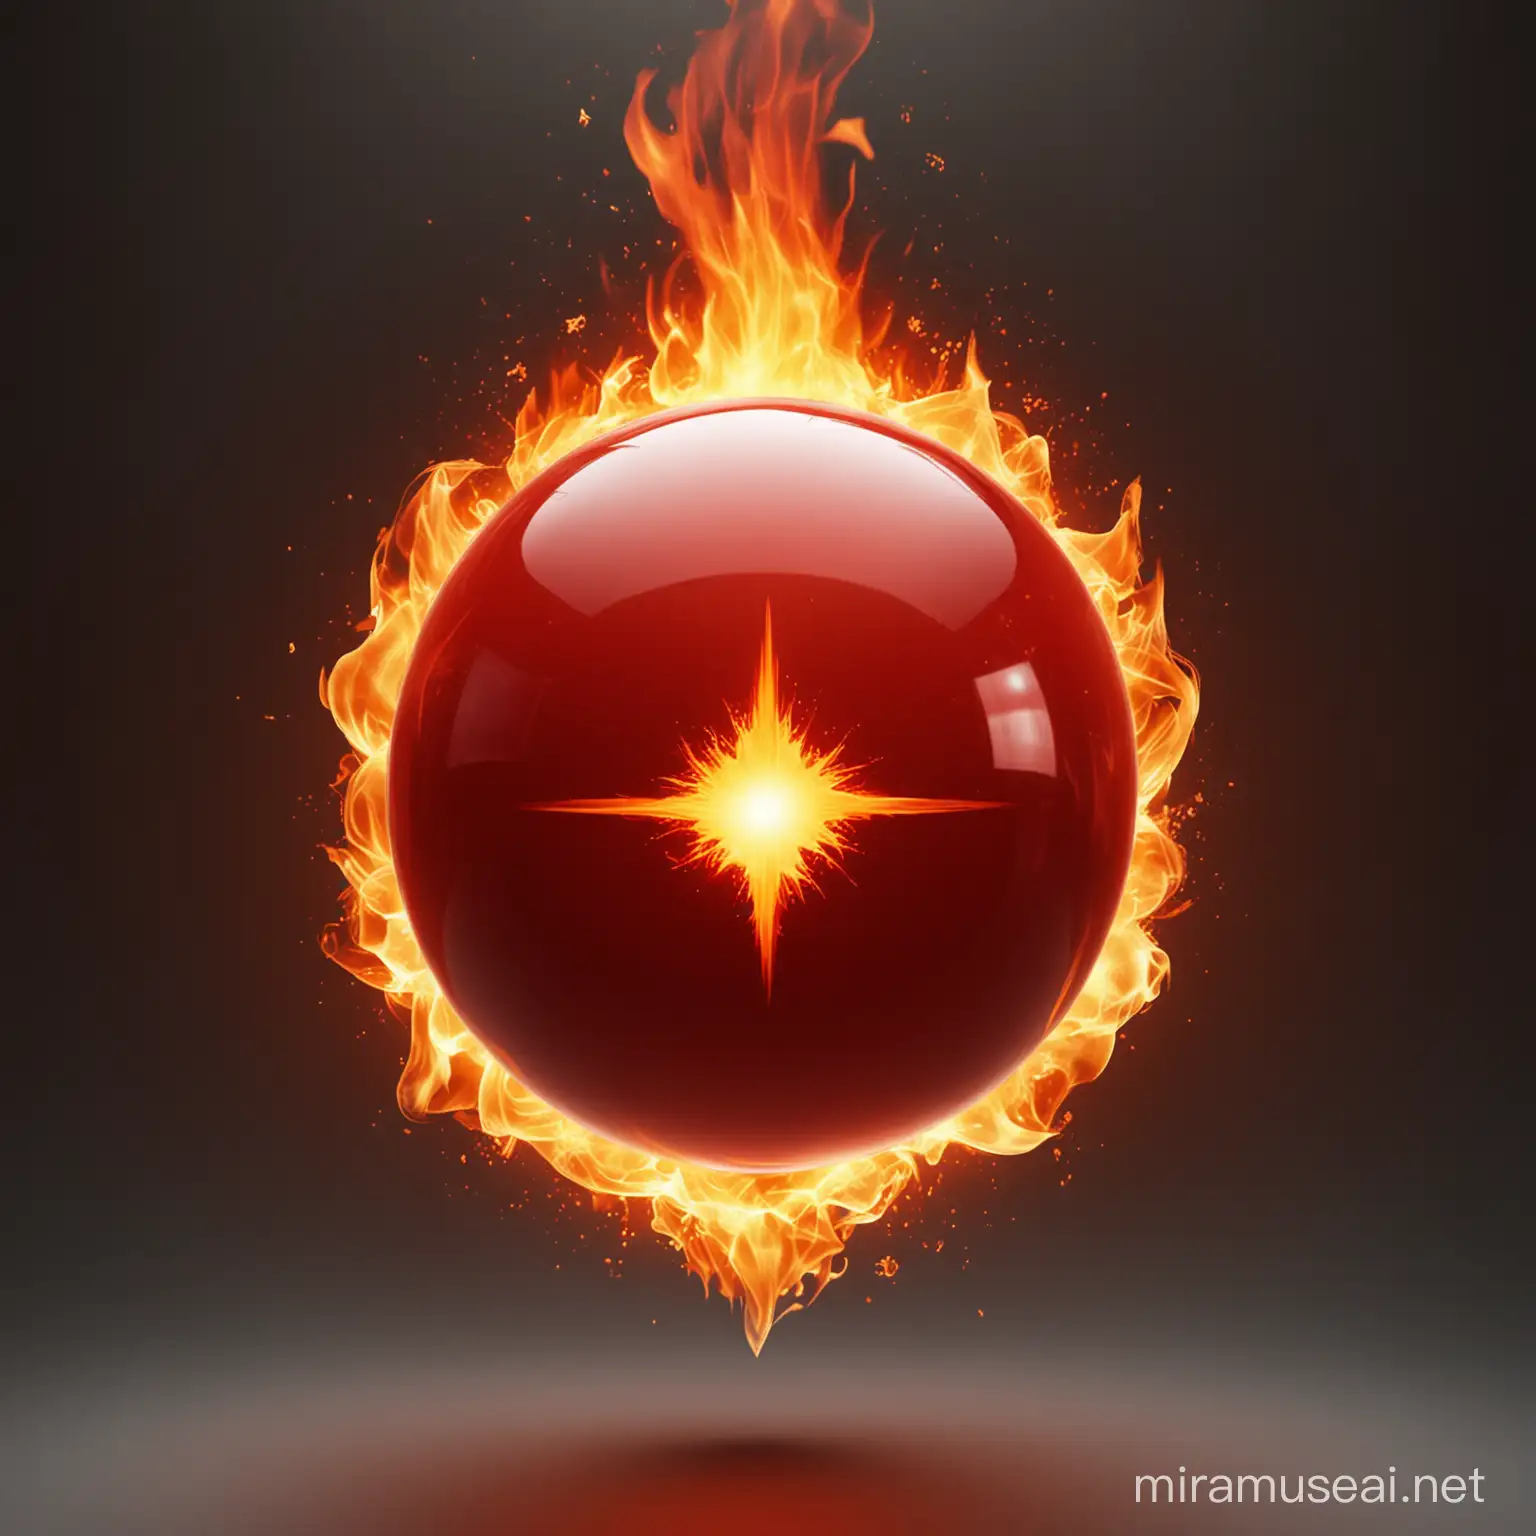 red orb, glossy, fire symbol in center